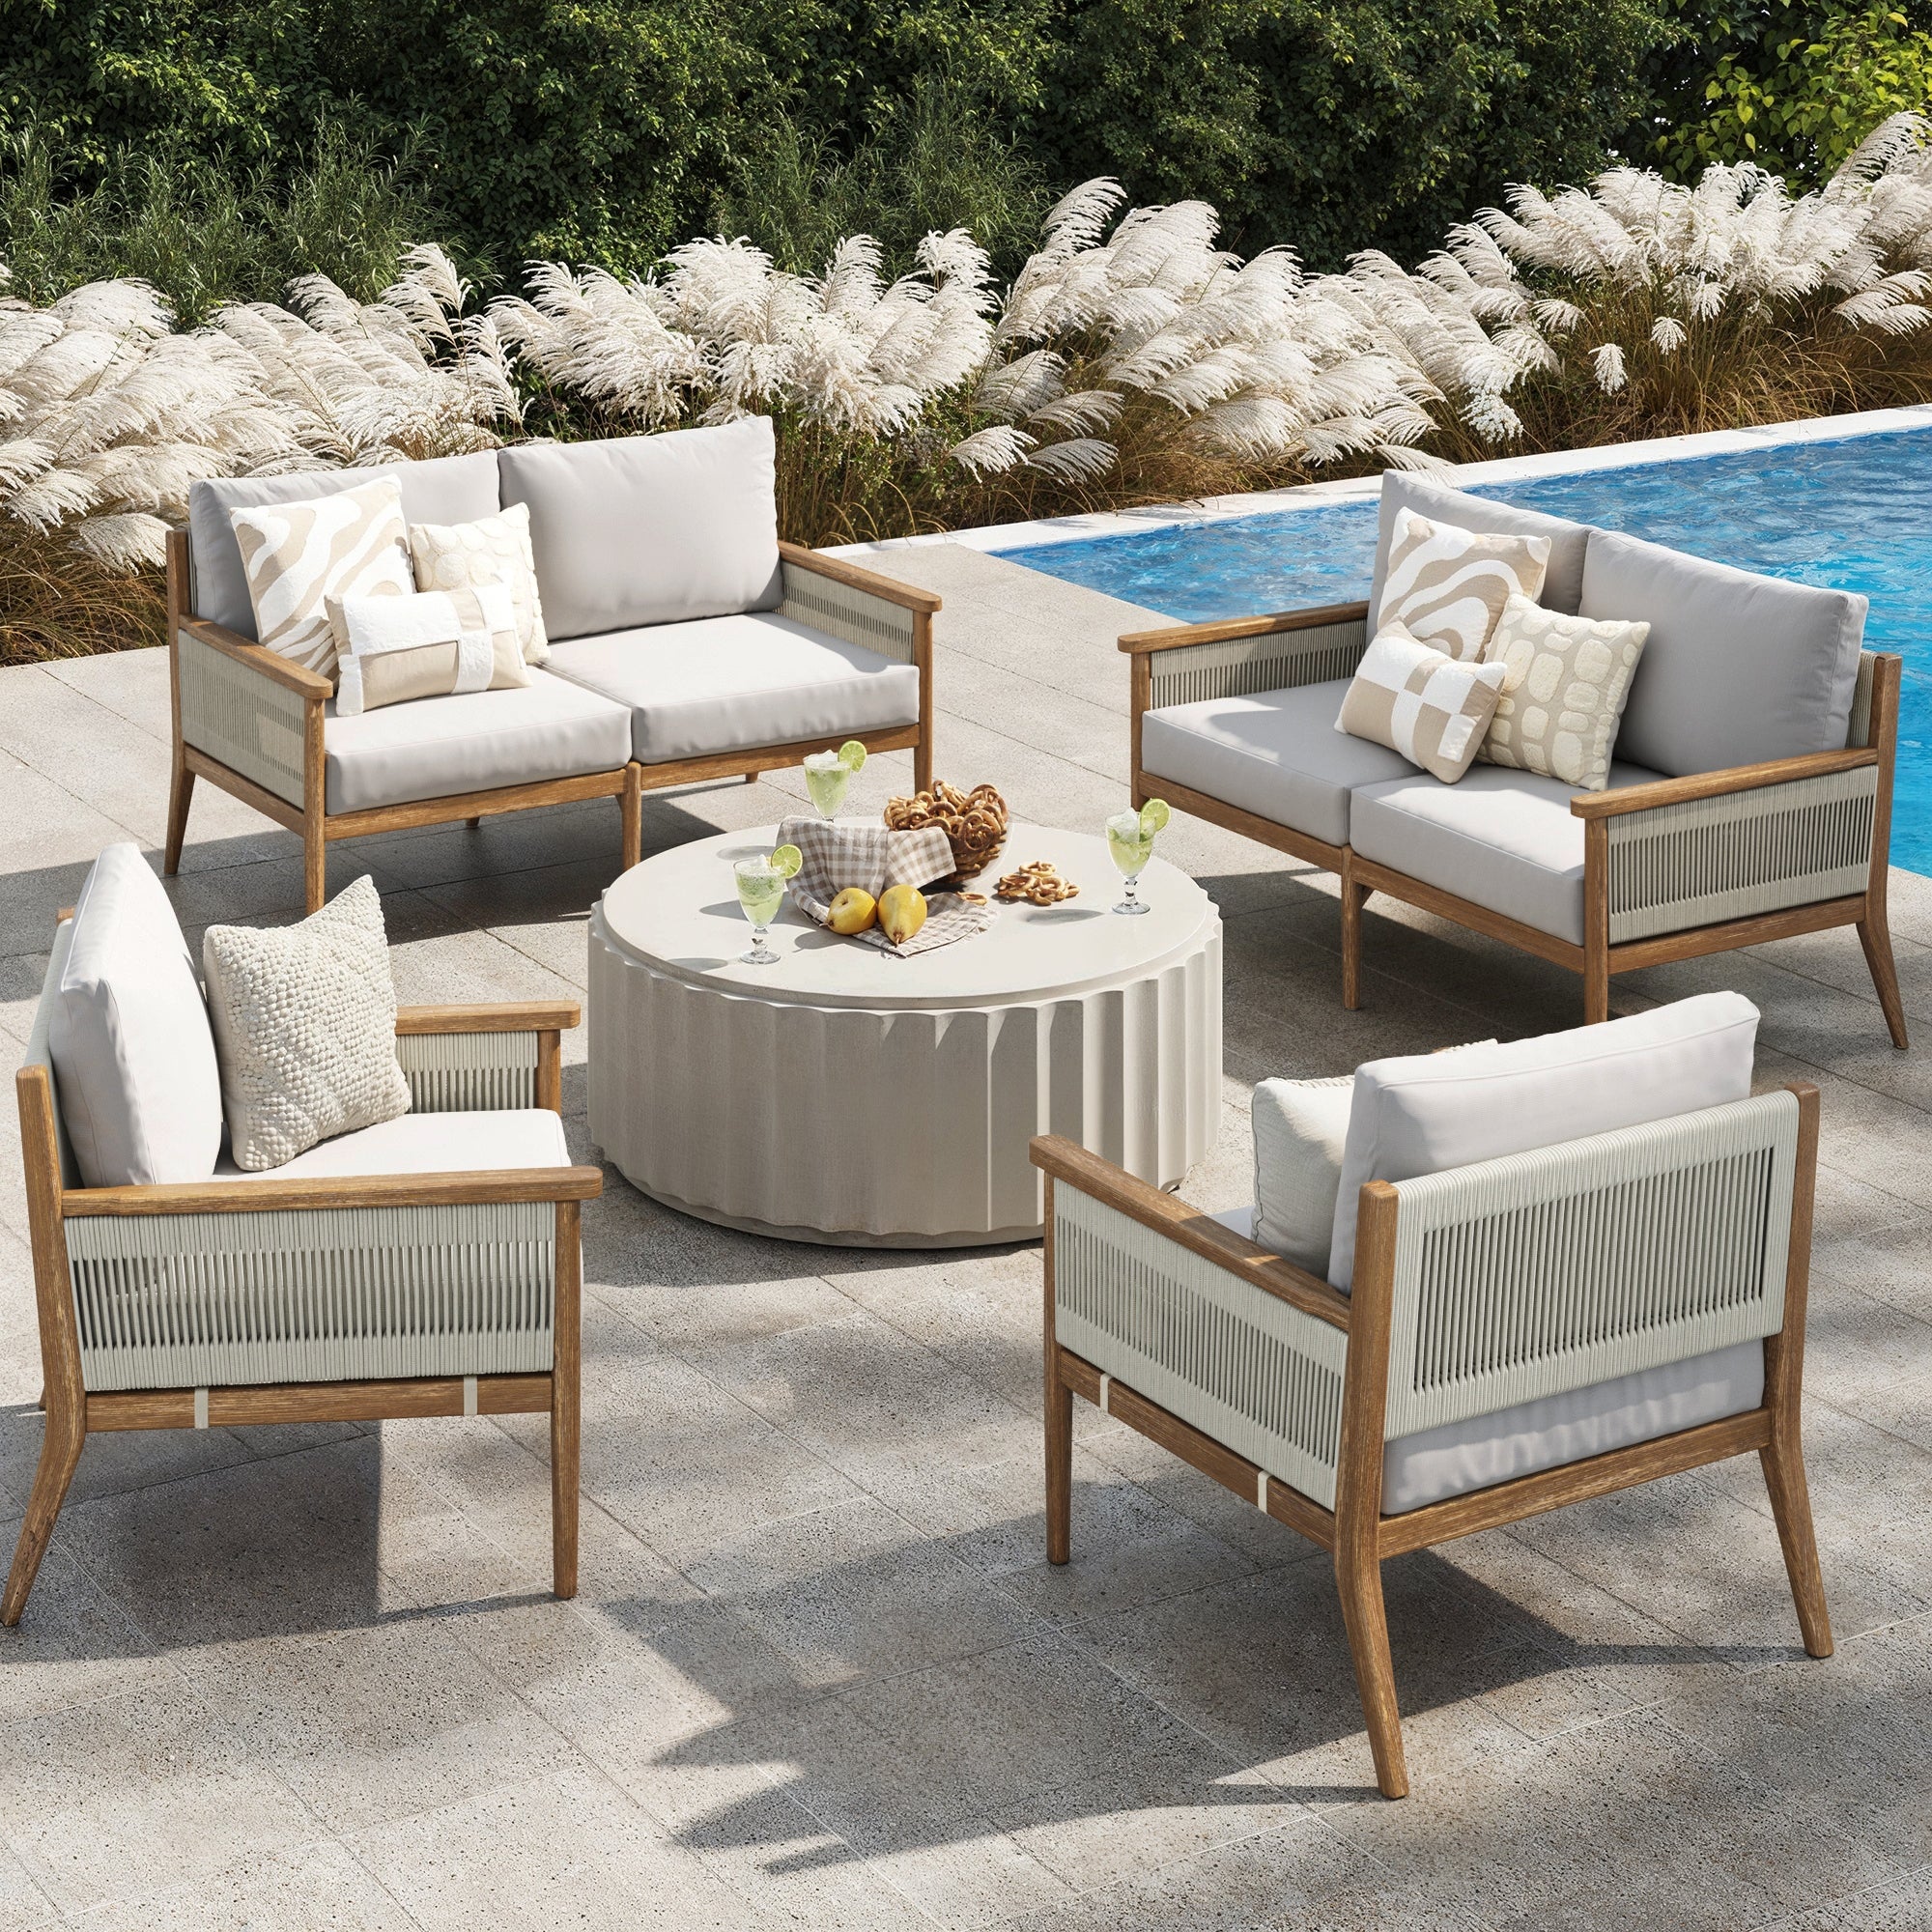 Set of 2 Rope Outdoor Loveseats & 2 Chairs